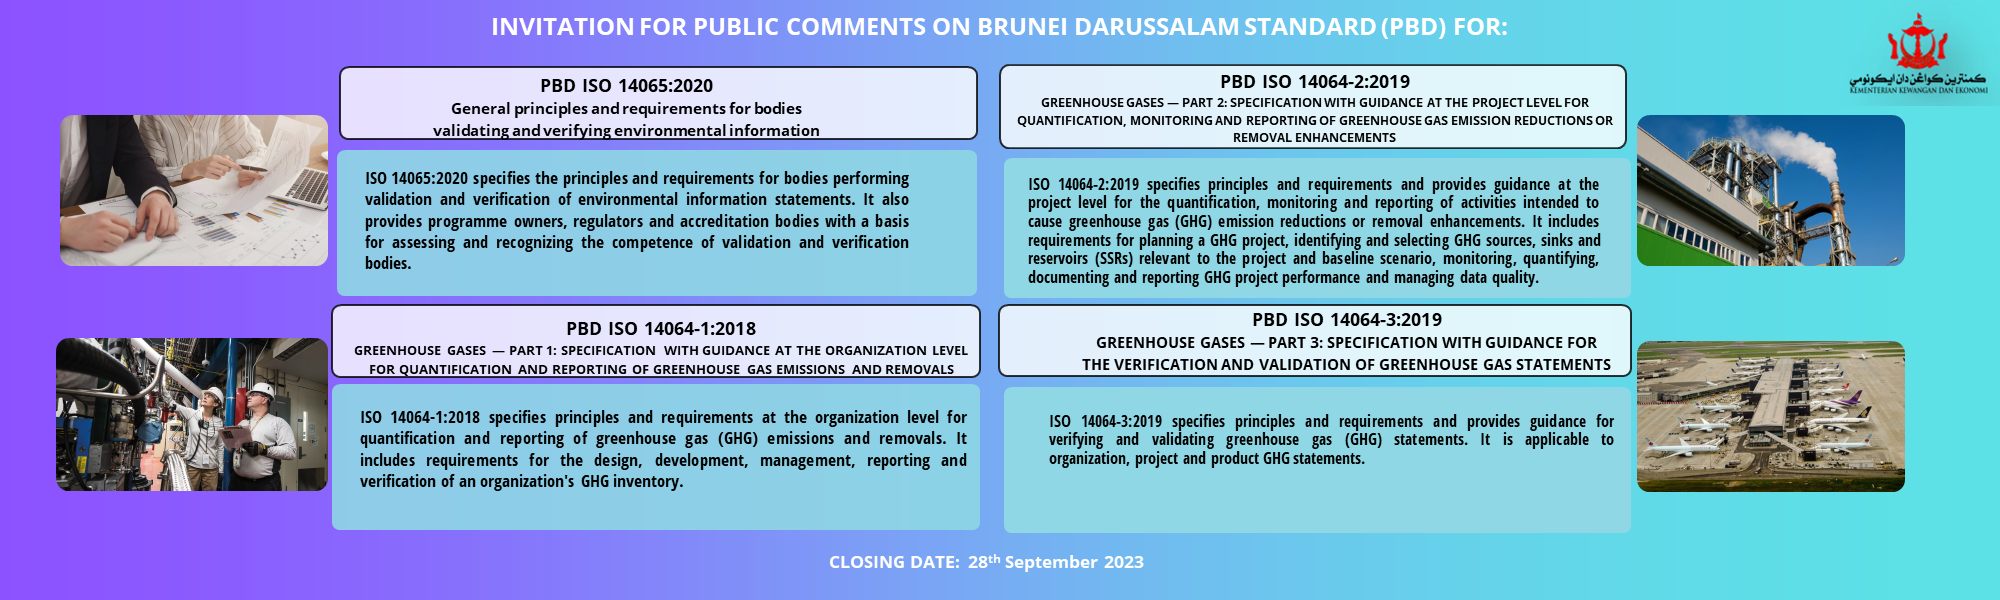 May Draft Public Comments Banner LAMPIRAN 2 (latest).png